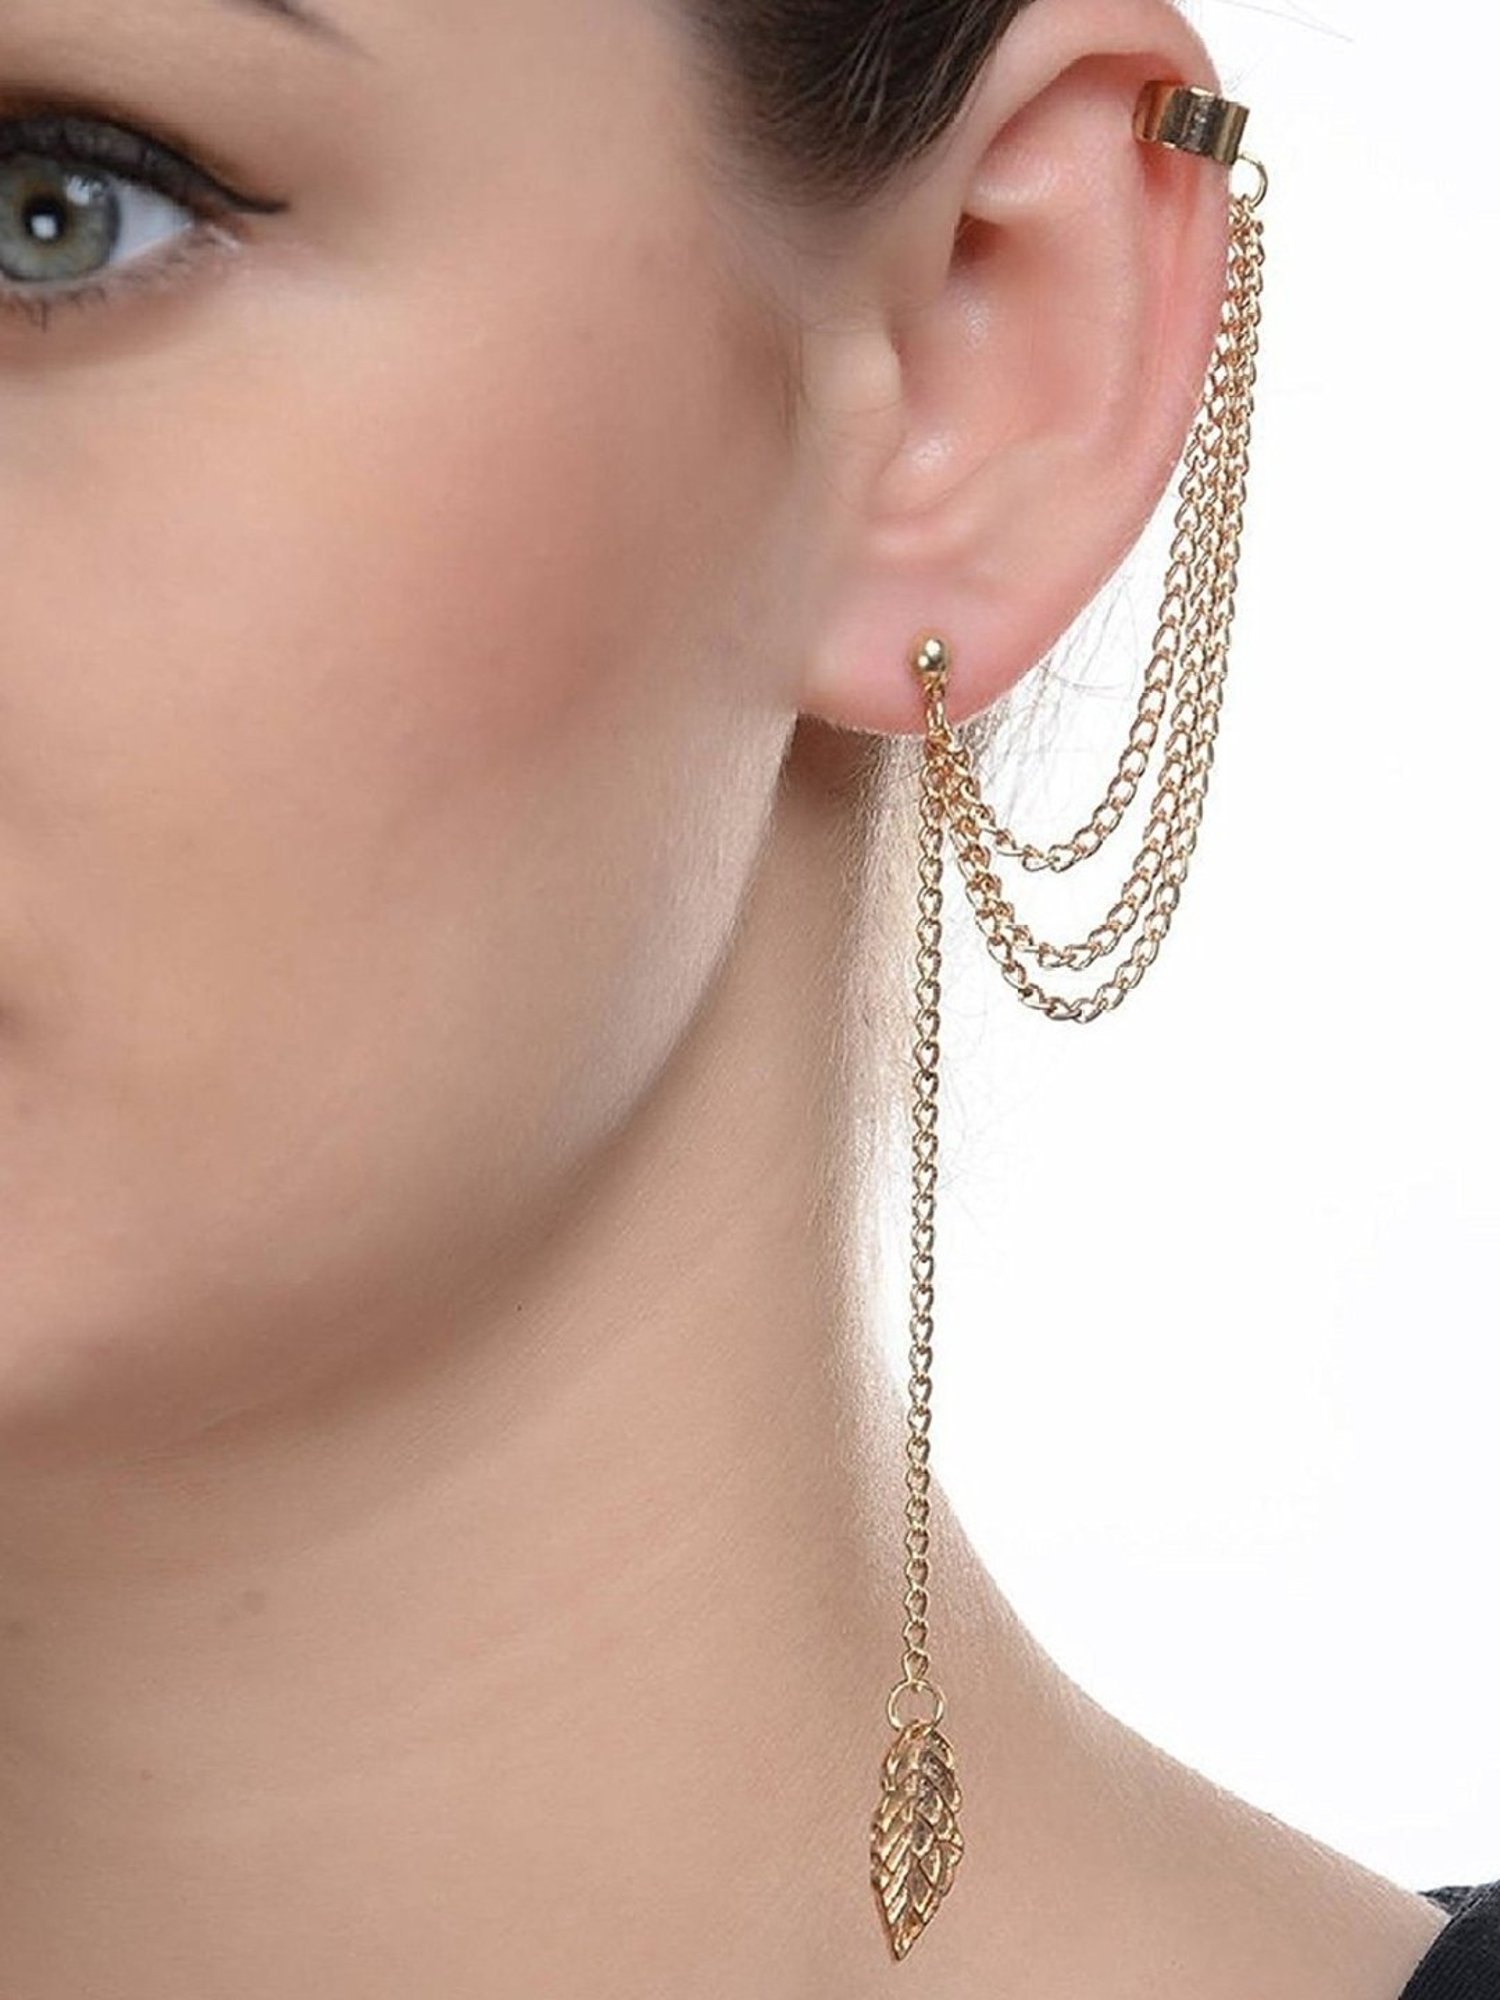 How To Style An Ear Cuff | The Astley Clarke Jewellery Blog